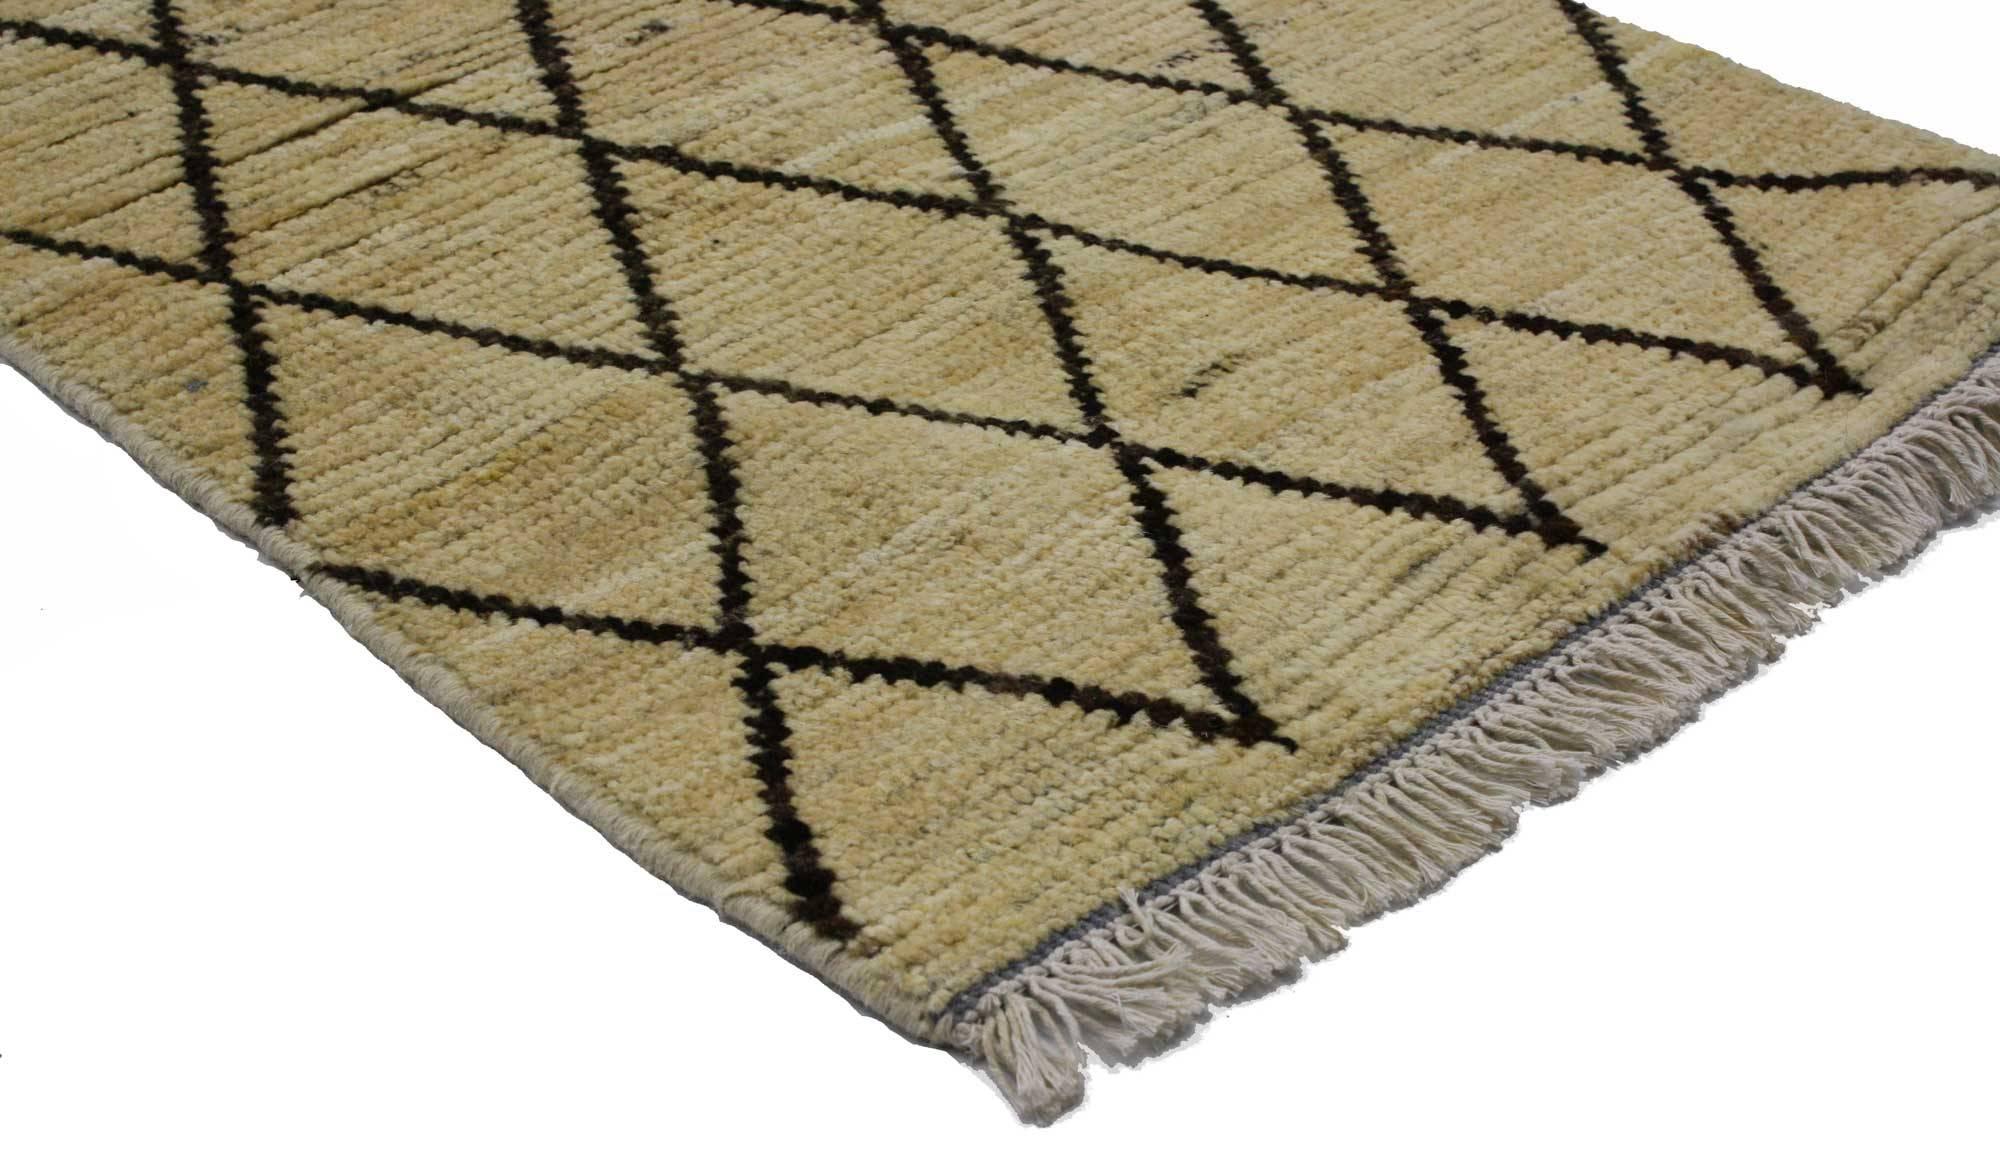 Indian Modern Moroccan Style Accent Rug, Kitchen, Bath Mat, Foyer or Entry Rug